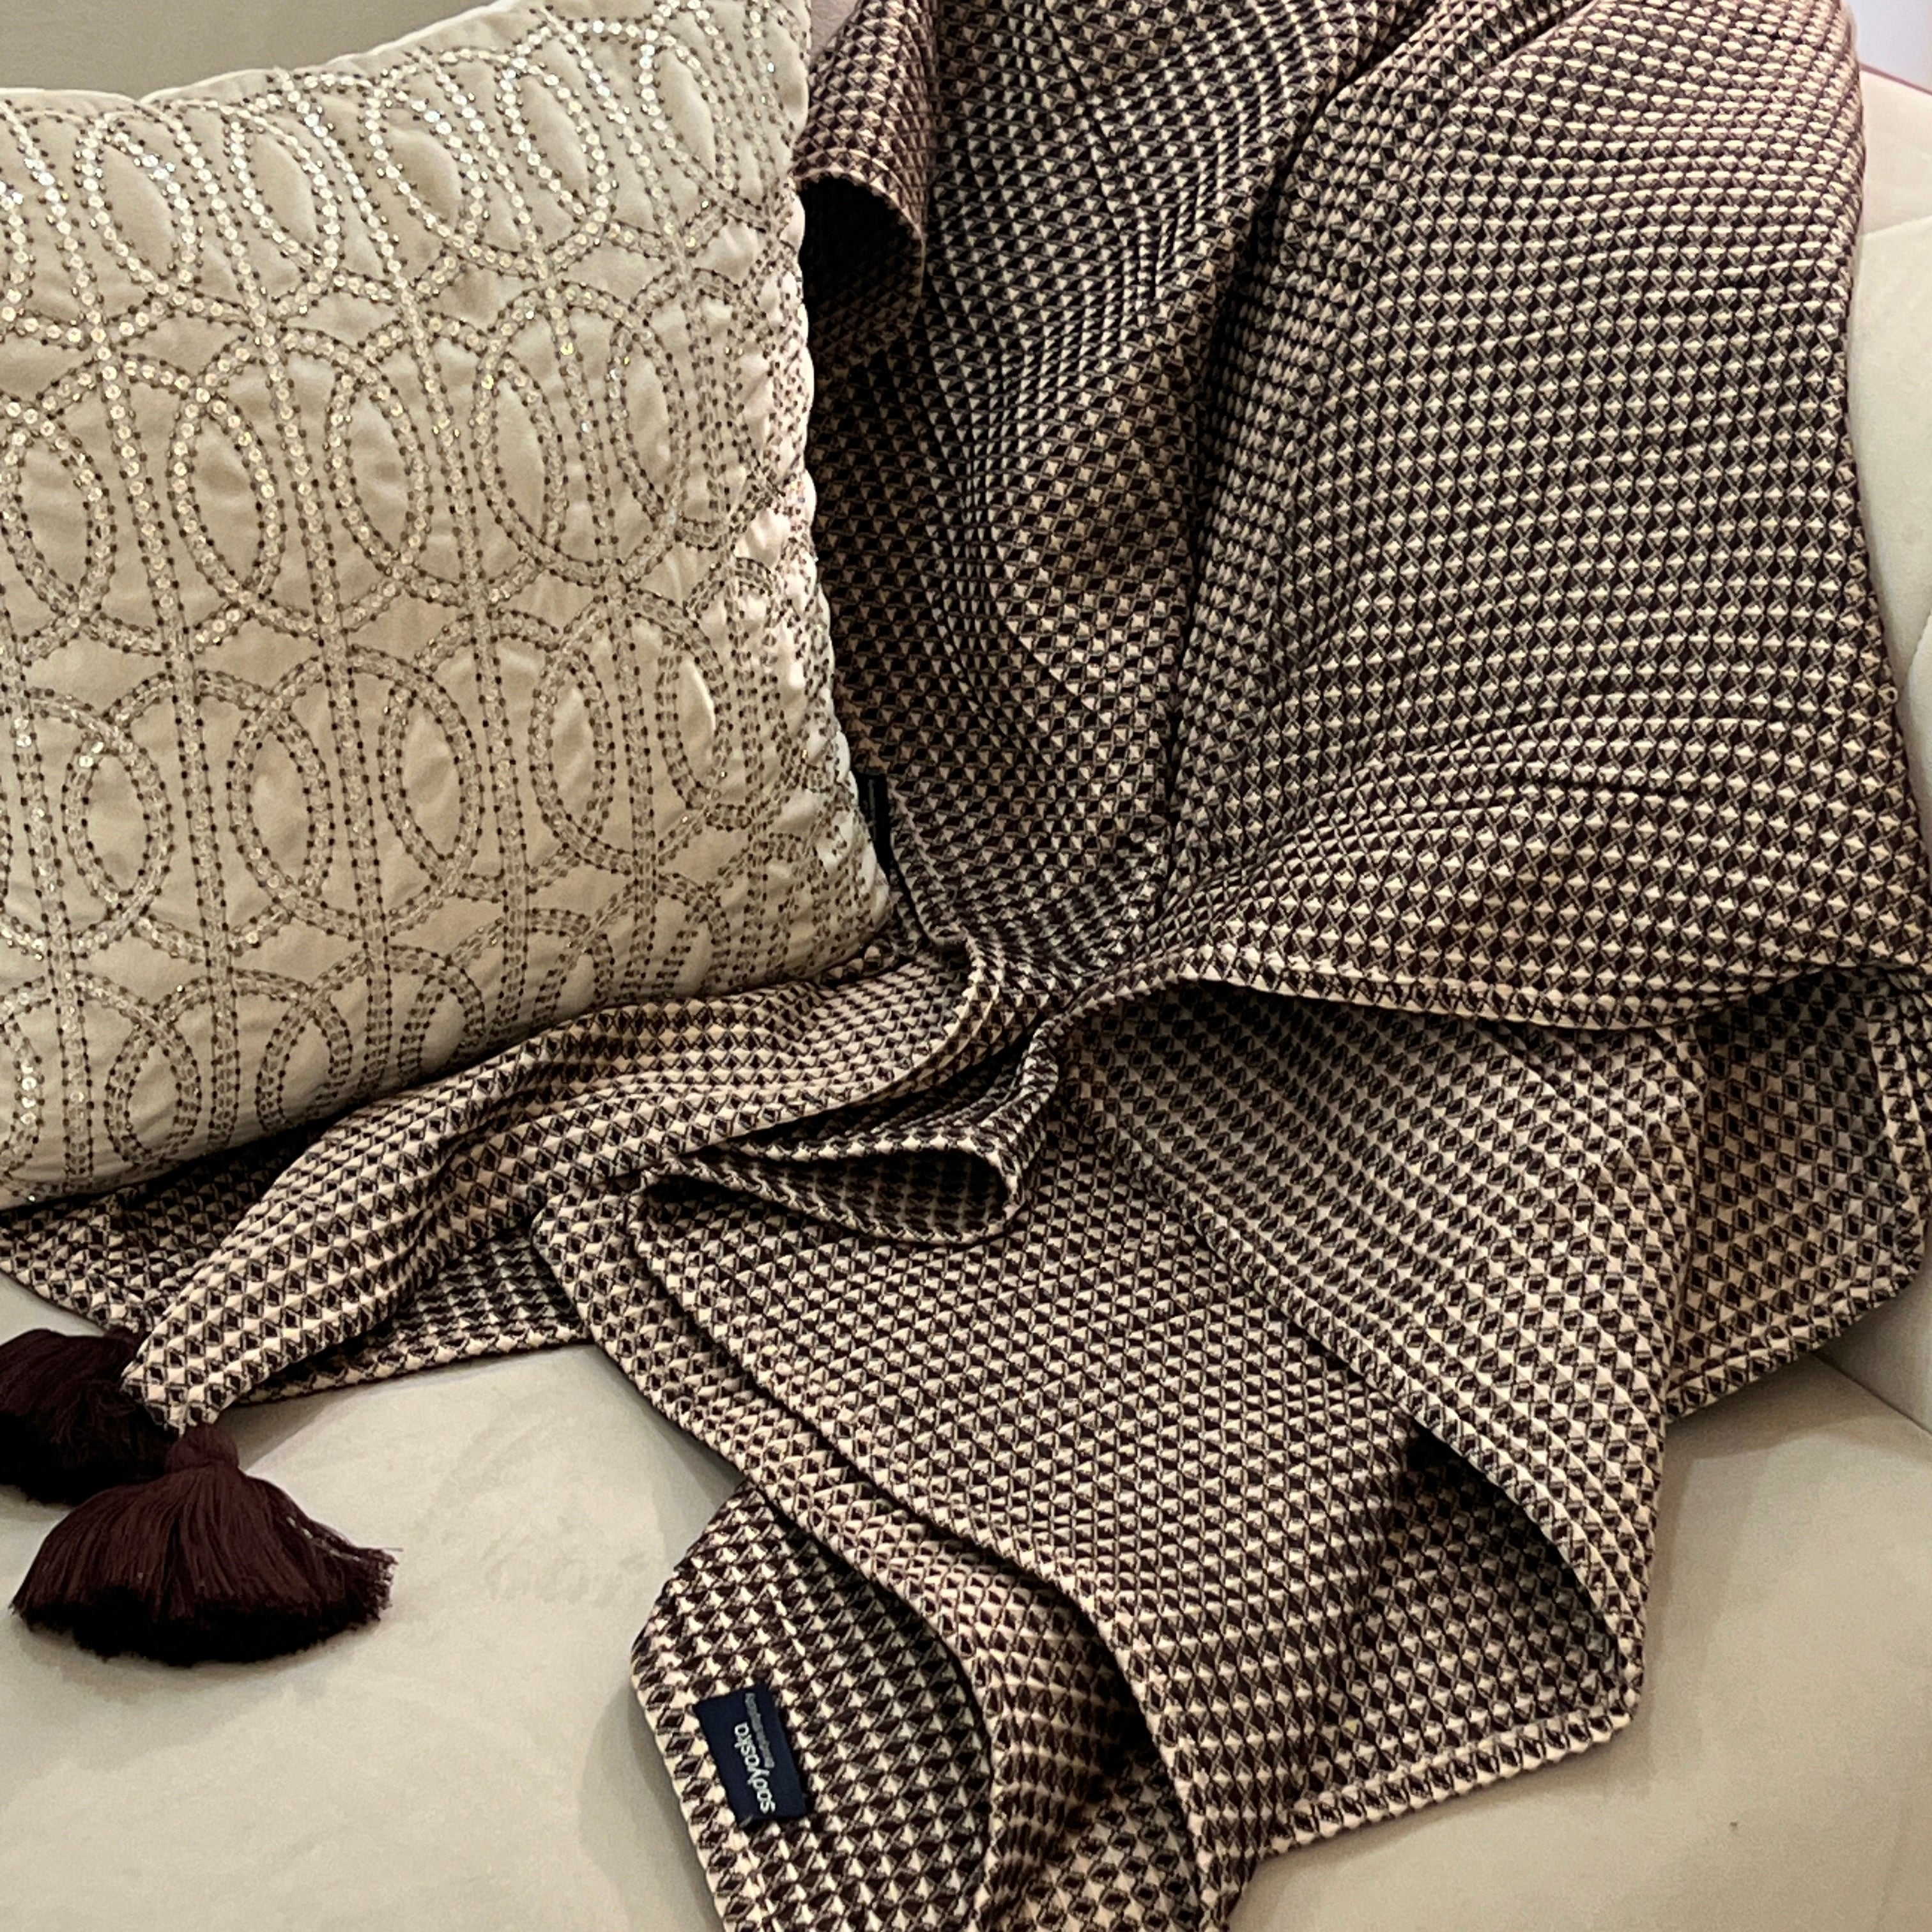 Honeycomb Coffee Woven Throw with Tassels